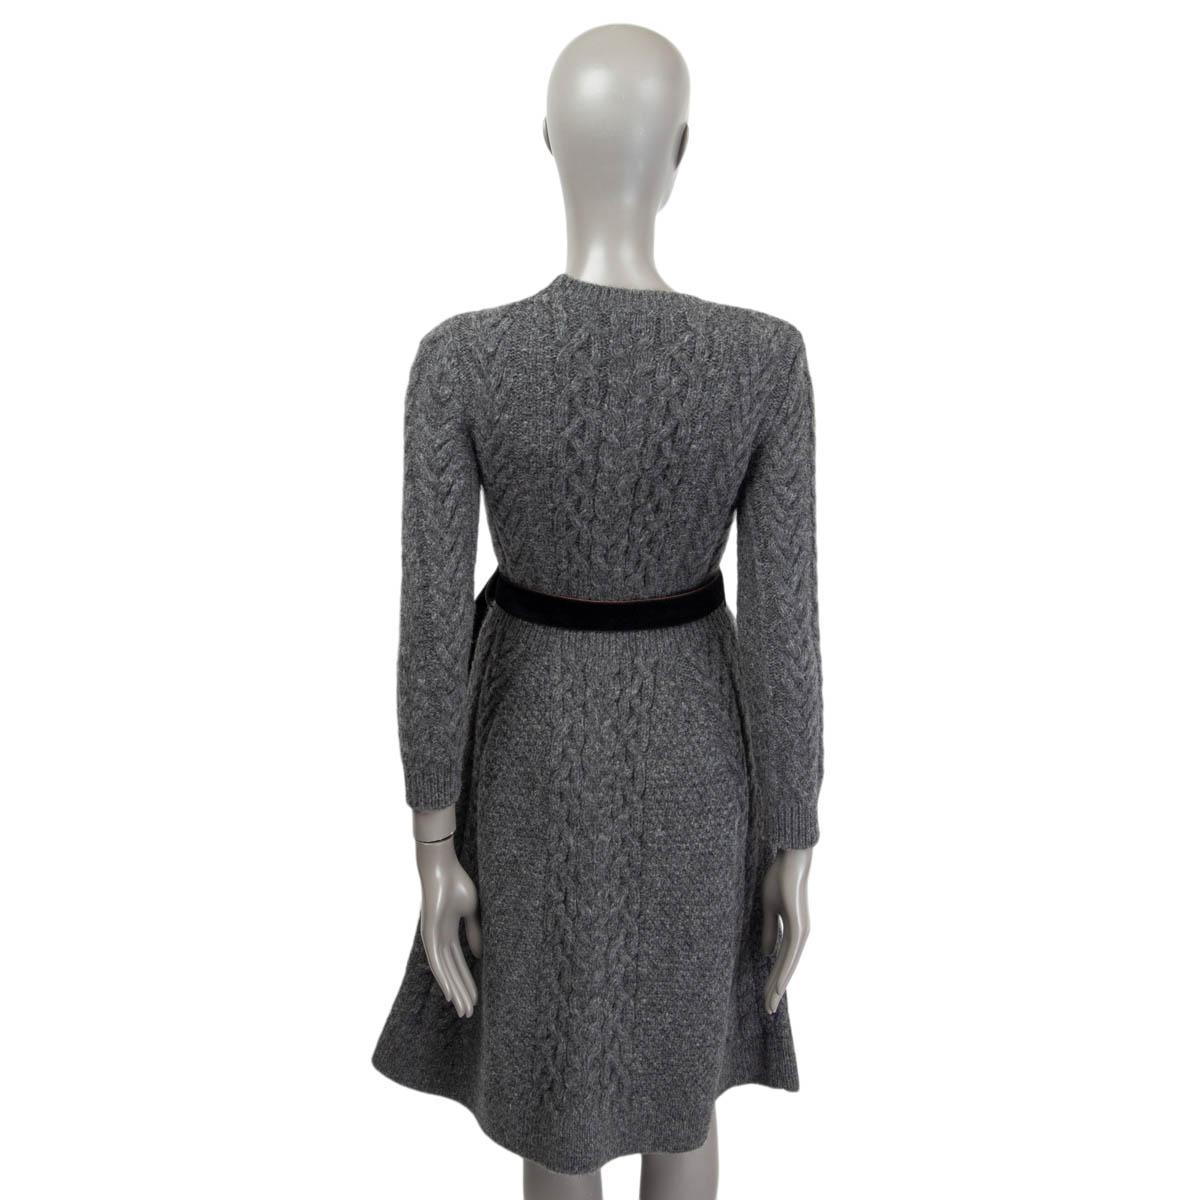 LOUIS VUITTON grey alpaca BELTED CHUNKY CABLE KNIT Dress S 1